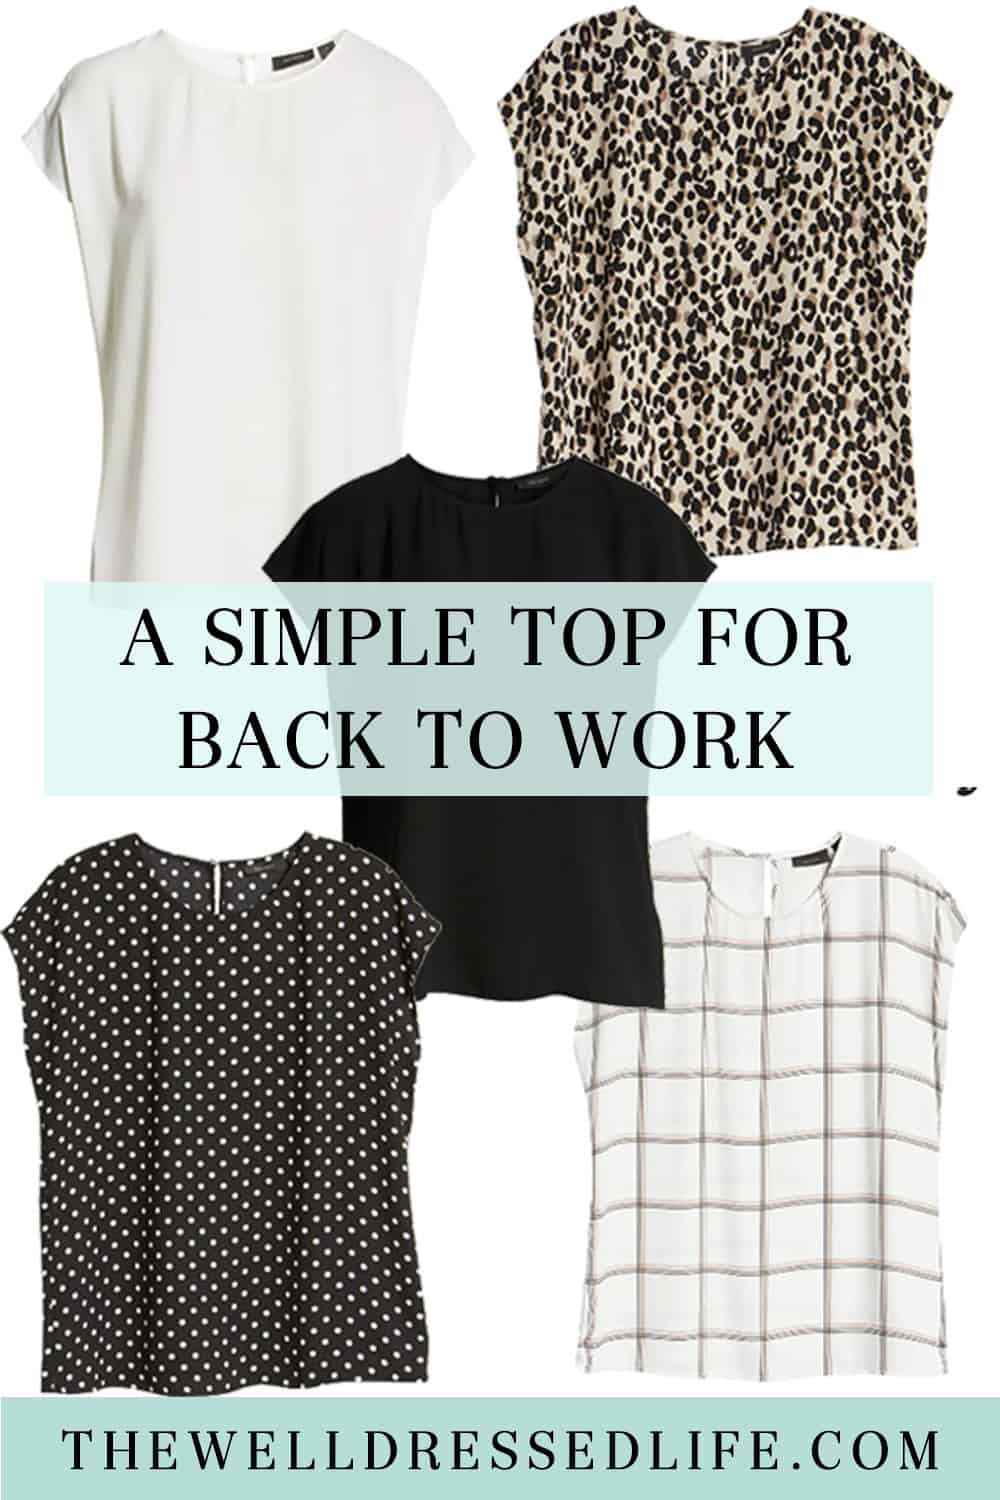 A Simple Top for Back to Work